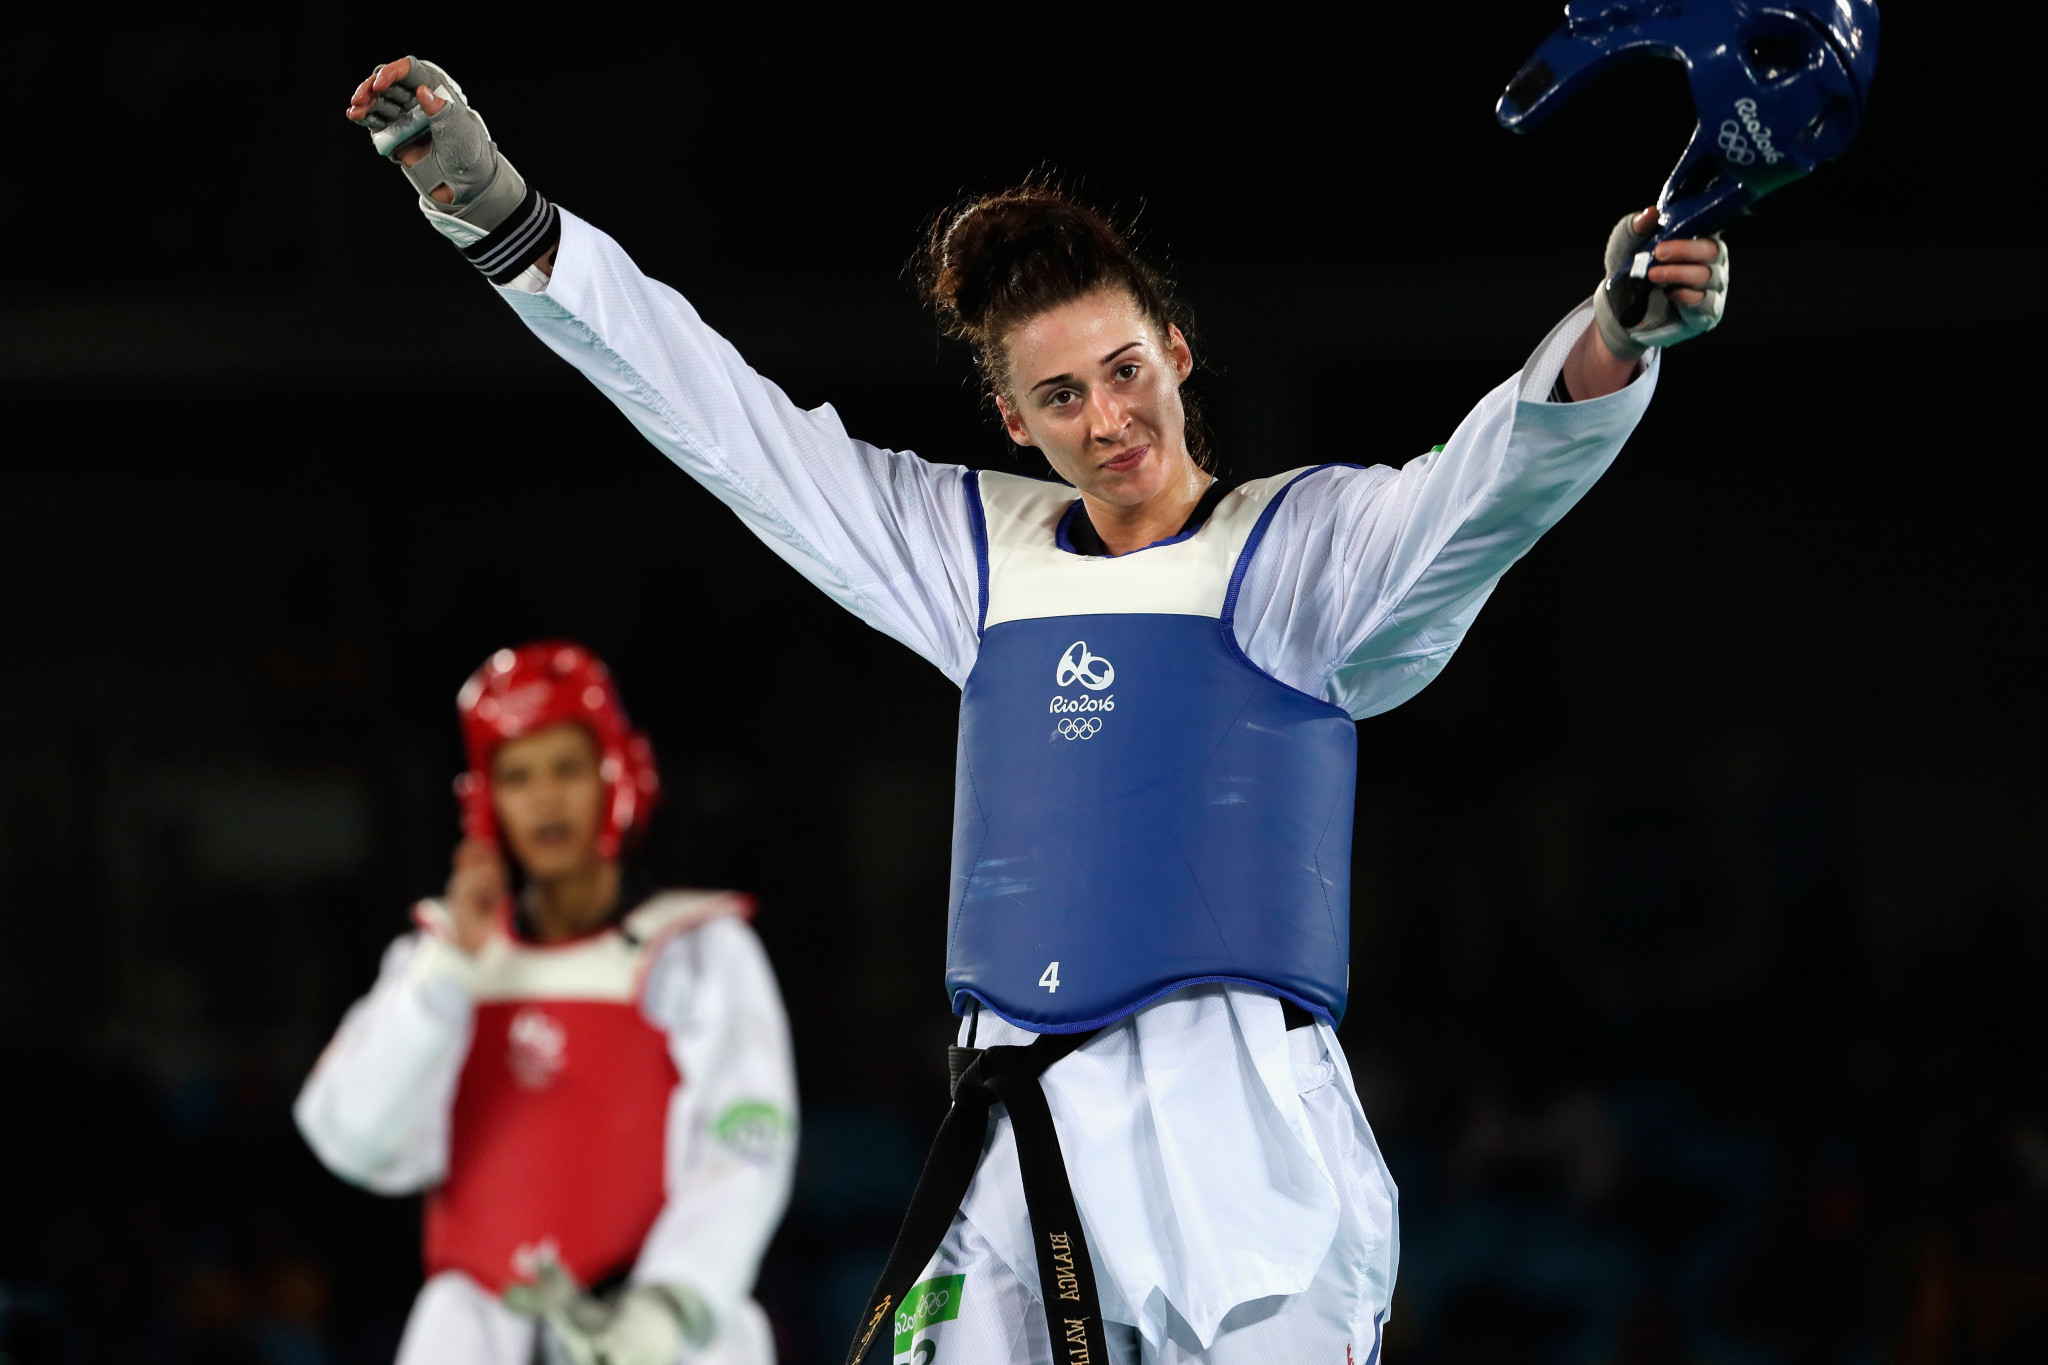 Taekwondo champions to teach at training camp in Norway